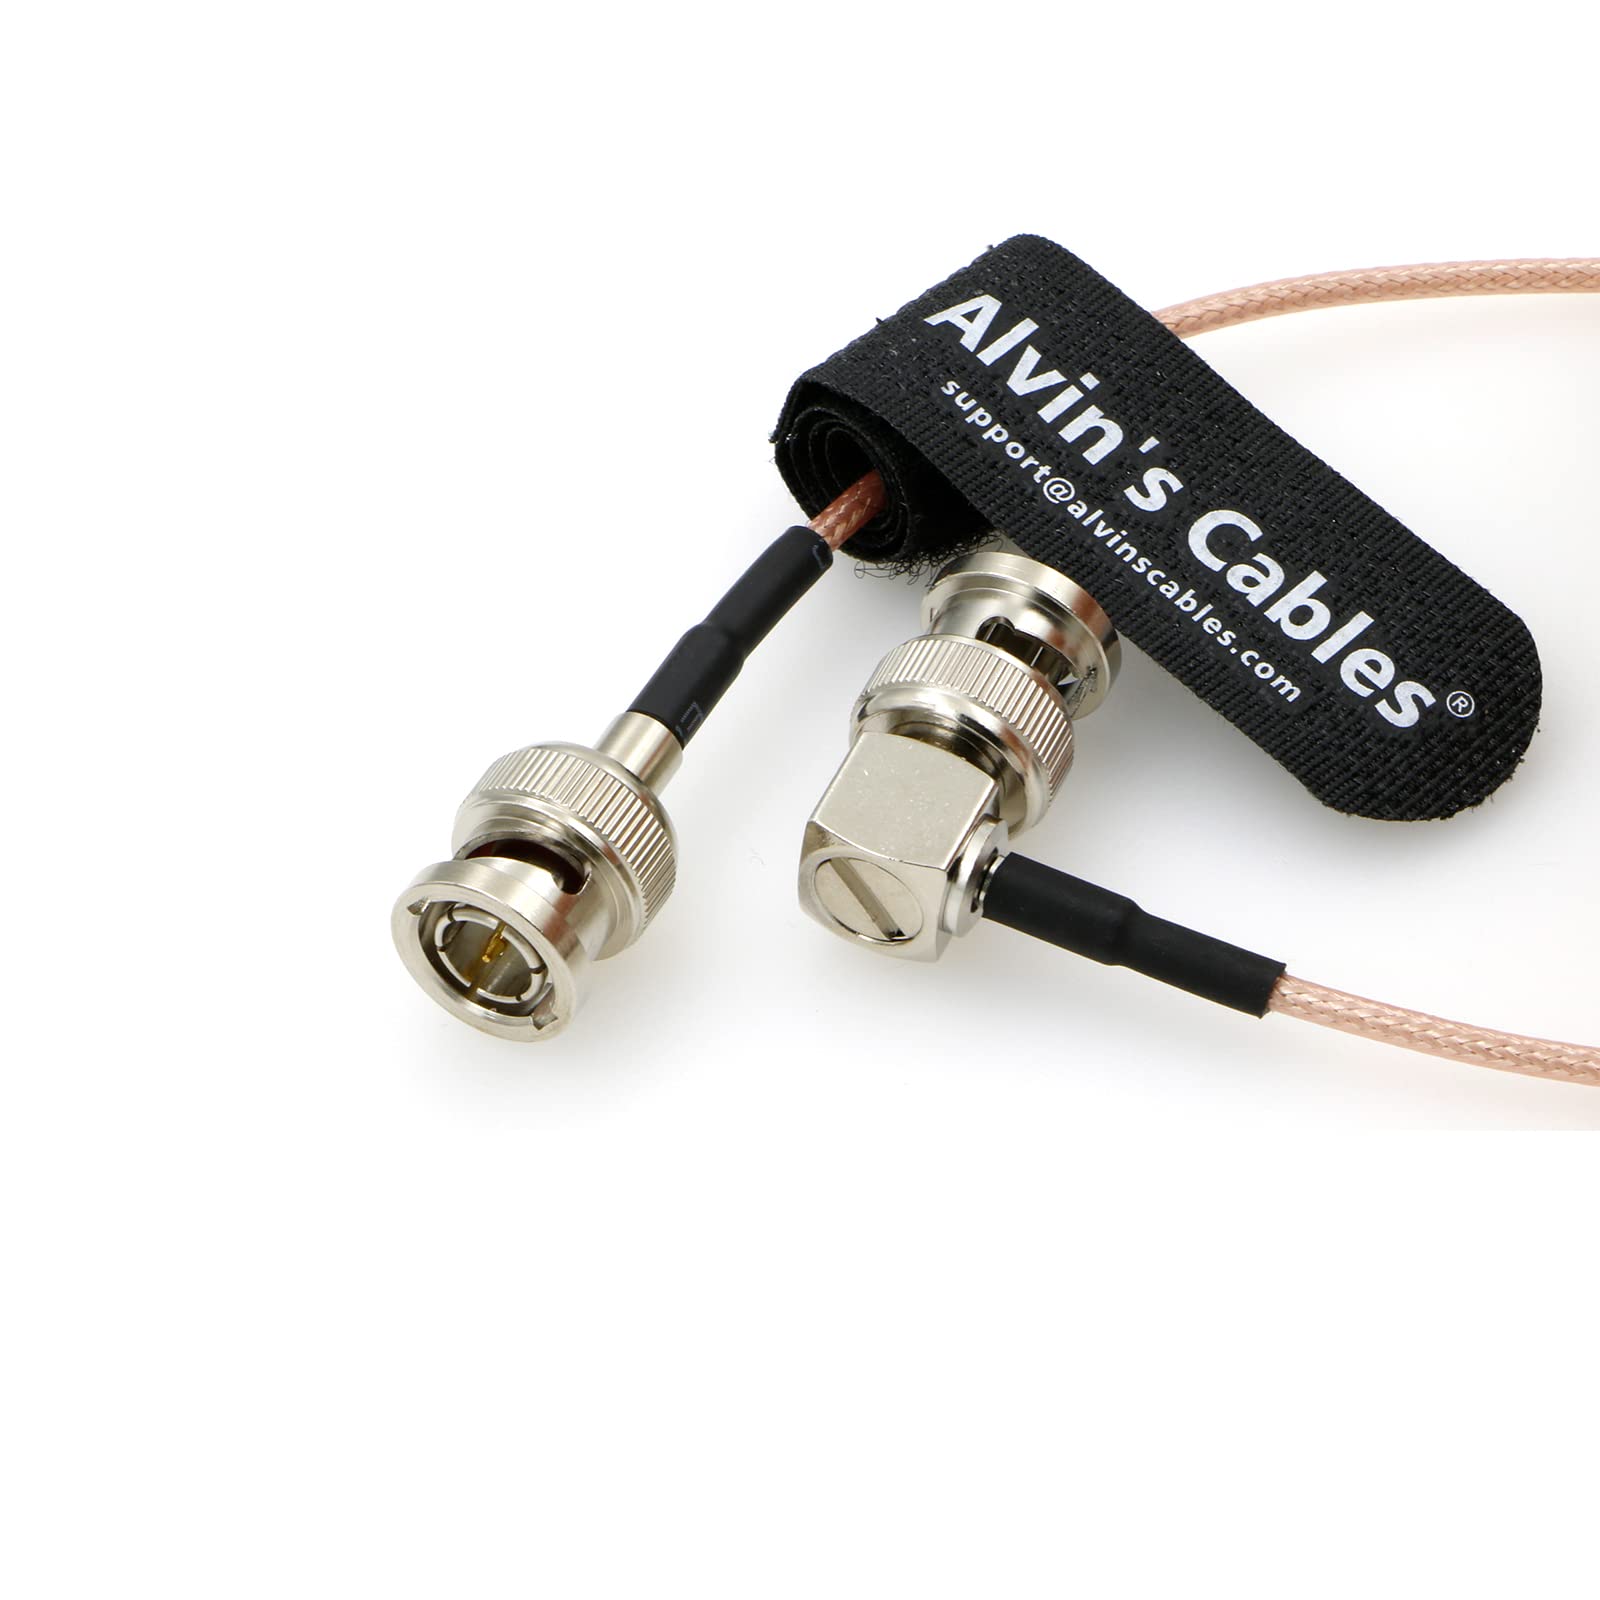 Alvin's Cables HD SDI BNC Coaxial Cable Right Angle to Straight 3G BNC Cable for Cameras Monitor Recorder Video Equipment 30CM|12inches